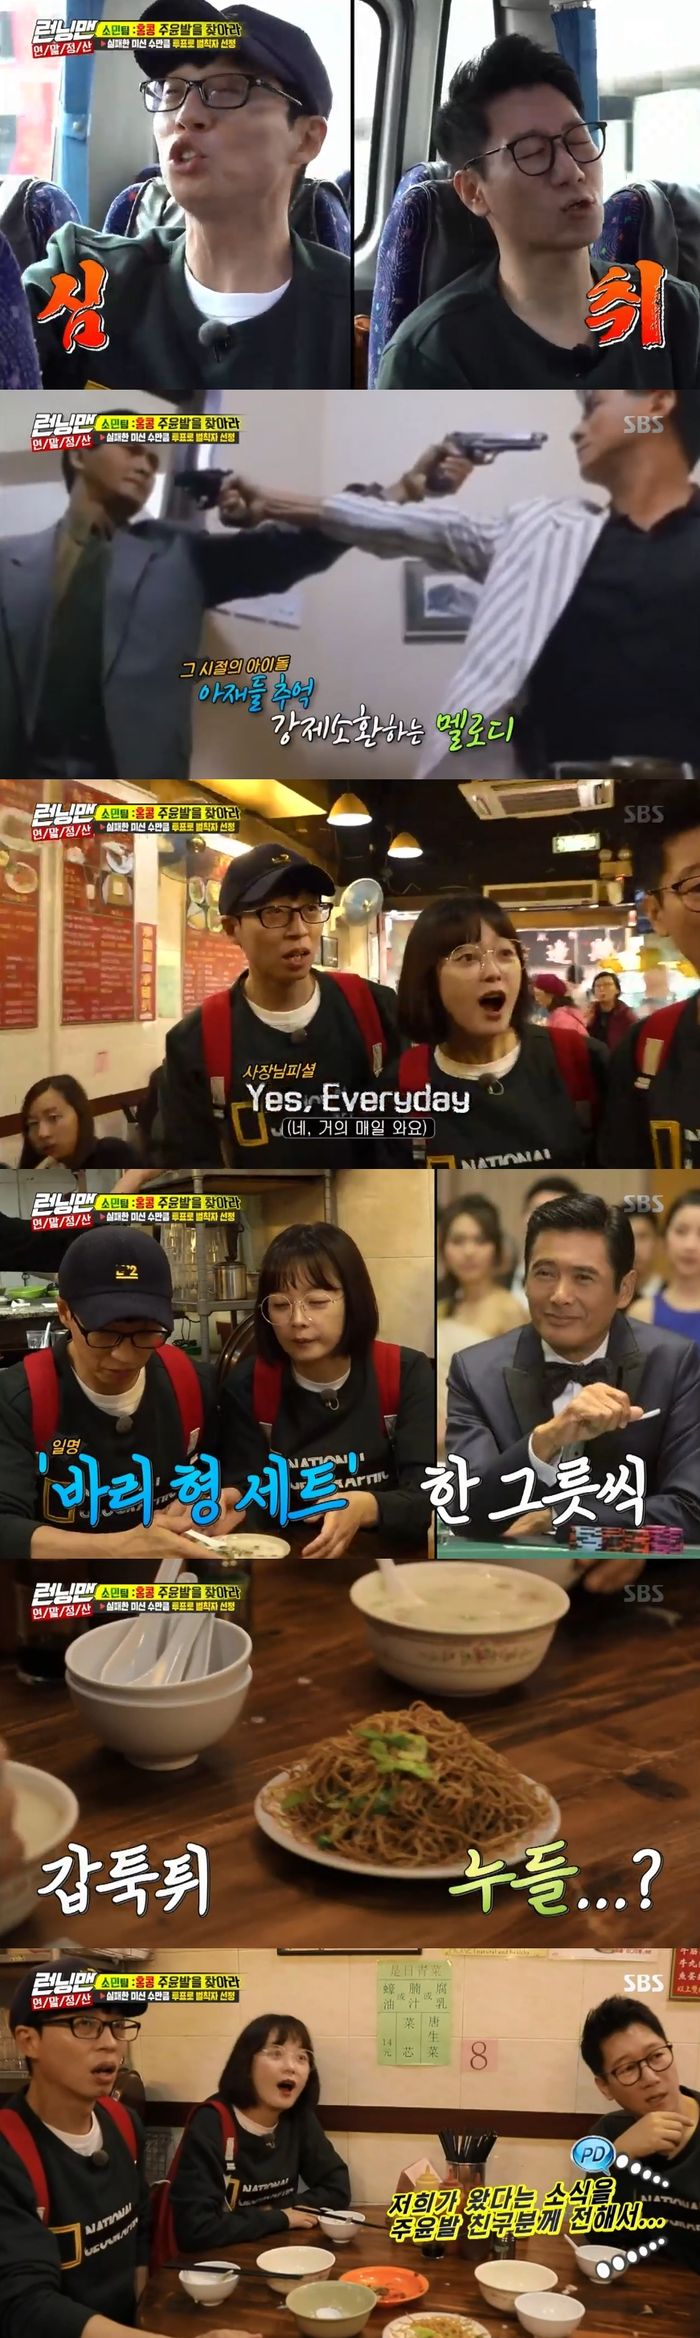 Running Man members have found Chow Yun-fats whereabouts.On SBS Running Man broadcasted on the 23rd, a team of Somin who went to Hong Kong performed a mission to take pictures together in search of Chow Yun-fat.Yoo Jae-Suk, who was previously given a photo shoot with Chow Yun-fat, was embarrassed by how he met Chow Yun-fat in Hong Kong.However, recently Chow Yun-fat was often seen in downtown Hong Kong, using public transportation.Somins team heard the news and first headed to a regular restaurant where Chow Yun-fat was often heard.At the restaurant he arrived, the boss said of Chow Yun-fat, I heard it at seven this morning, every morning. The Somin team, late with a car, was sorry.Eventually, the Somin team decided to eat with porridge and noodles, a menu eaten by Chow Yun-fat there.The previous day, Jeon So-min, who had eaten a series of noodles, was suffering from no noodles.After finishing the meal, Somin team followed up to Chow Yun-fats favorite milk tea house.